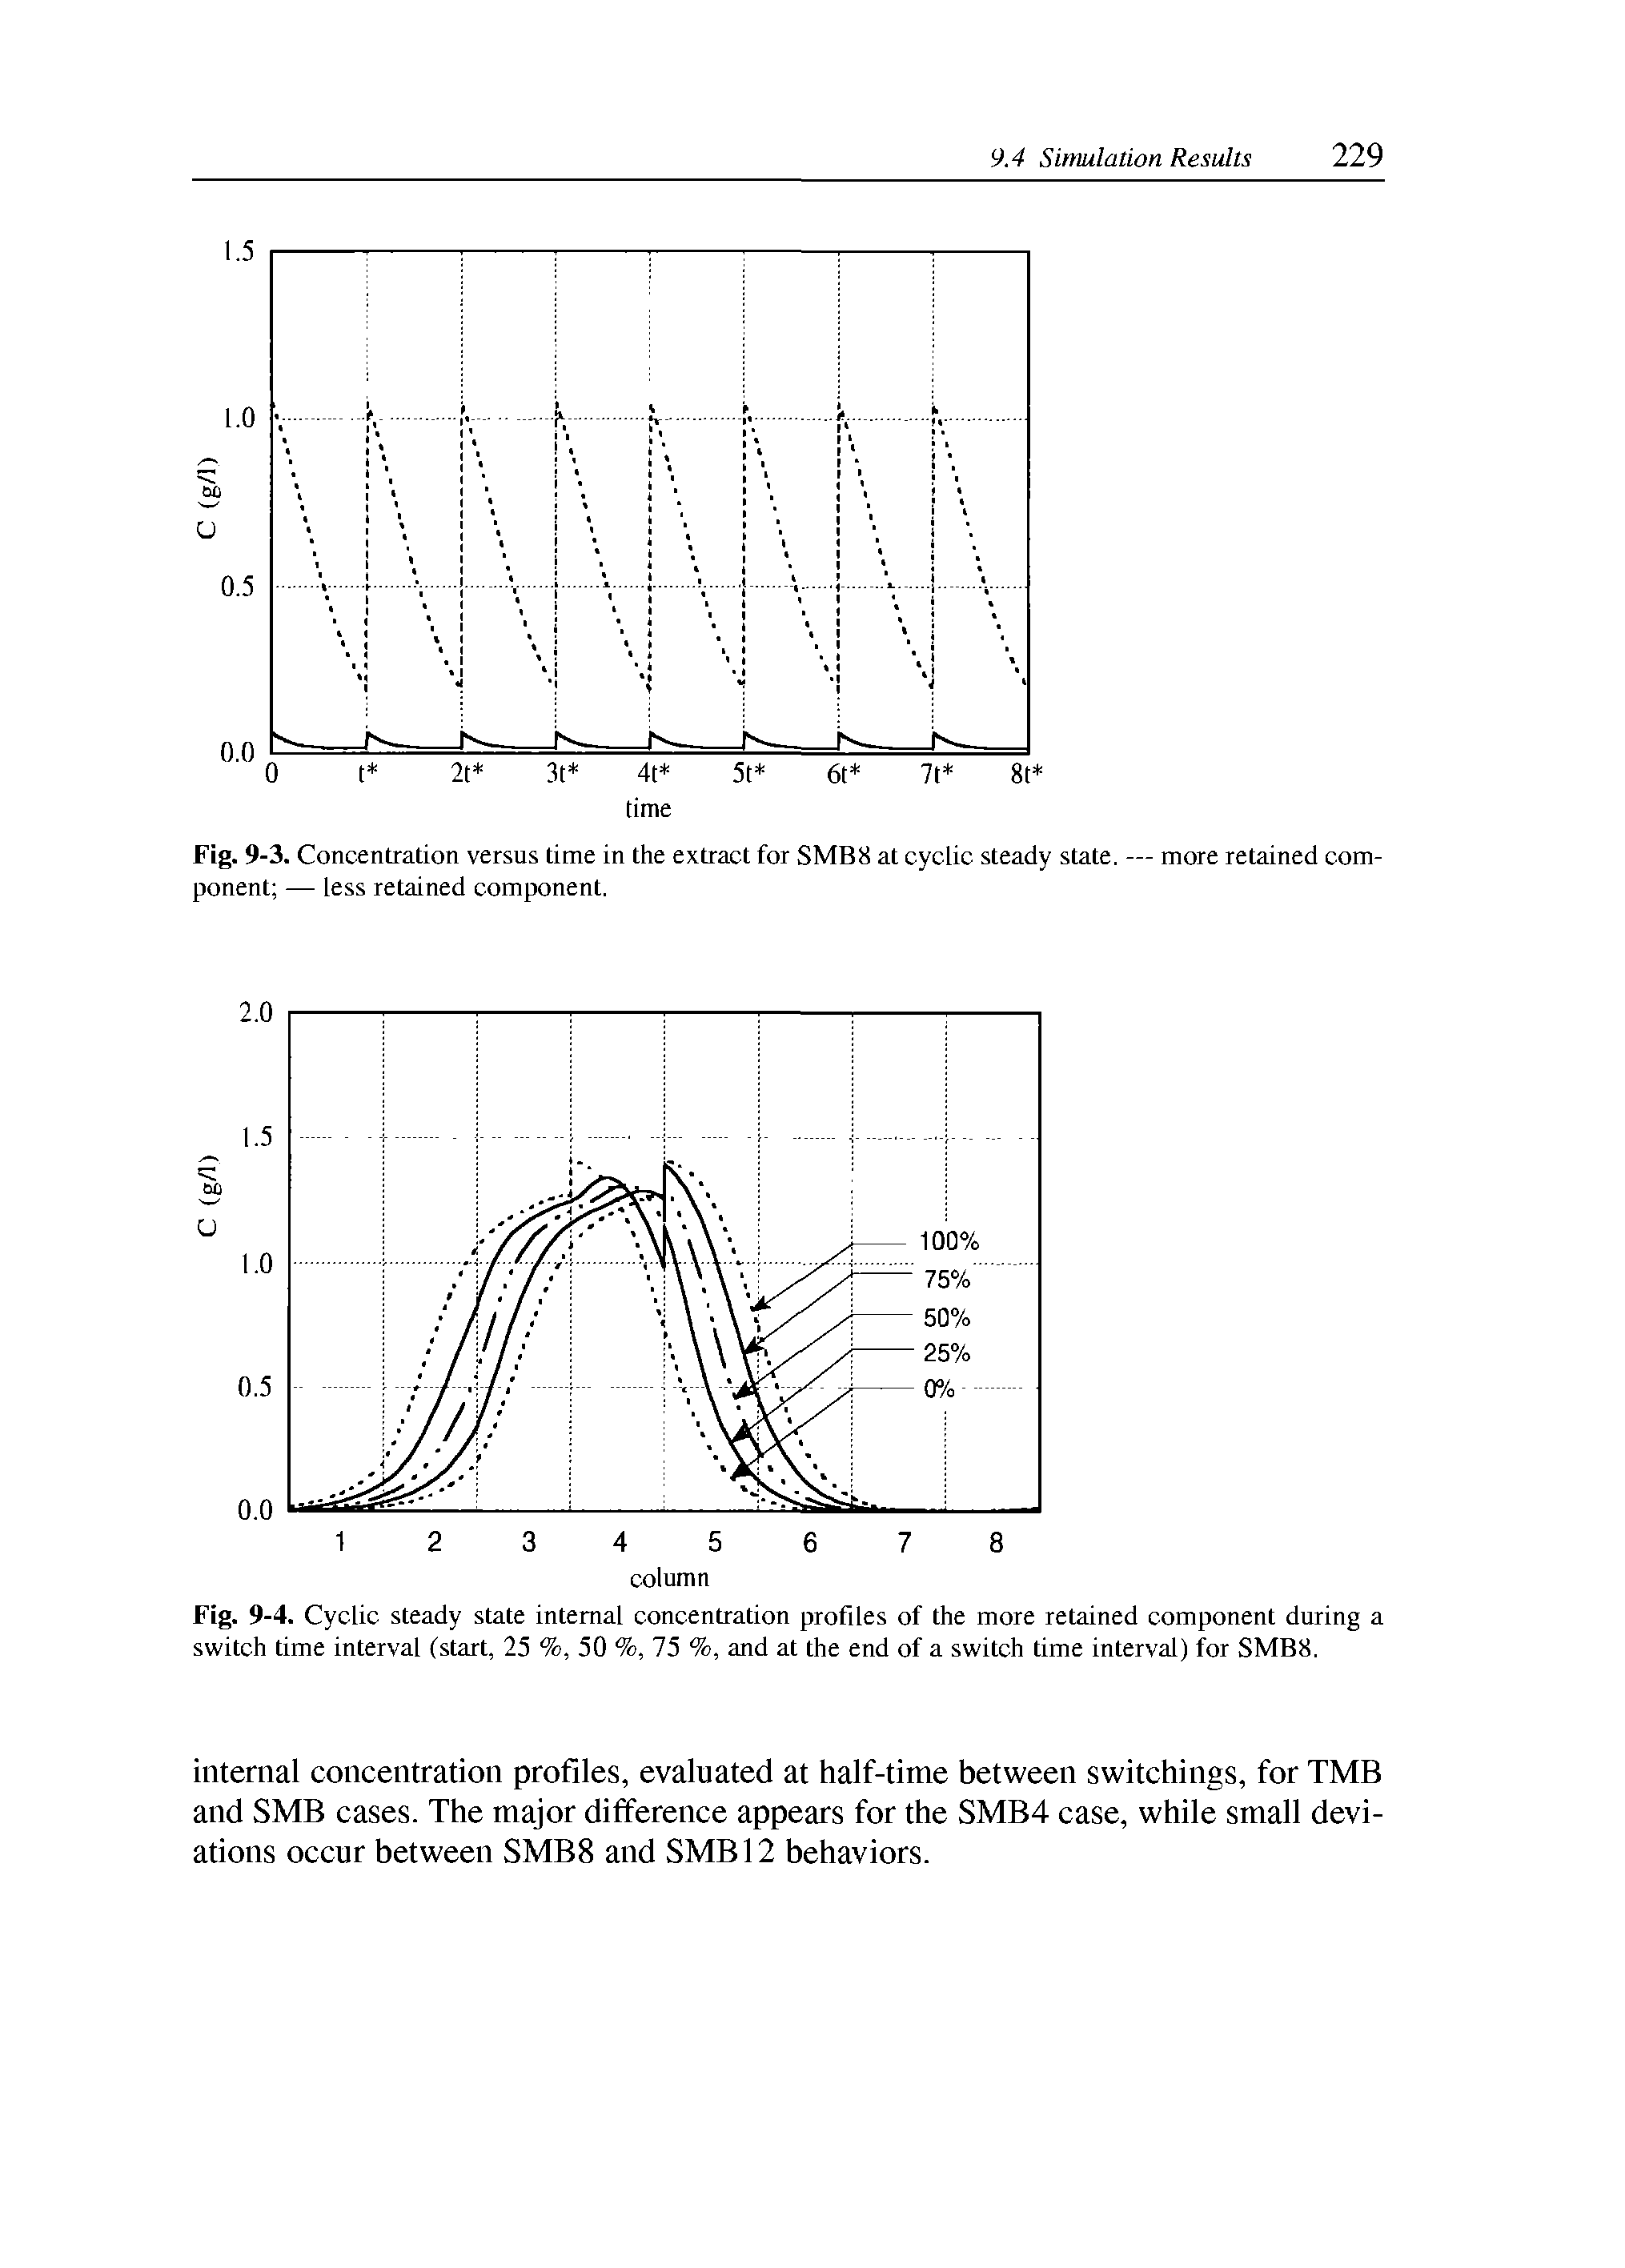 Fig. 9-4. Cyclic steady state internal concentration profiles of the more retained component during a switch time interval (start, 25 %, 50 %, 75 %, and at the end of a switch time interval) for SMBS.